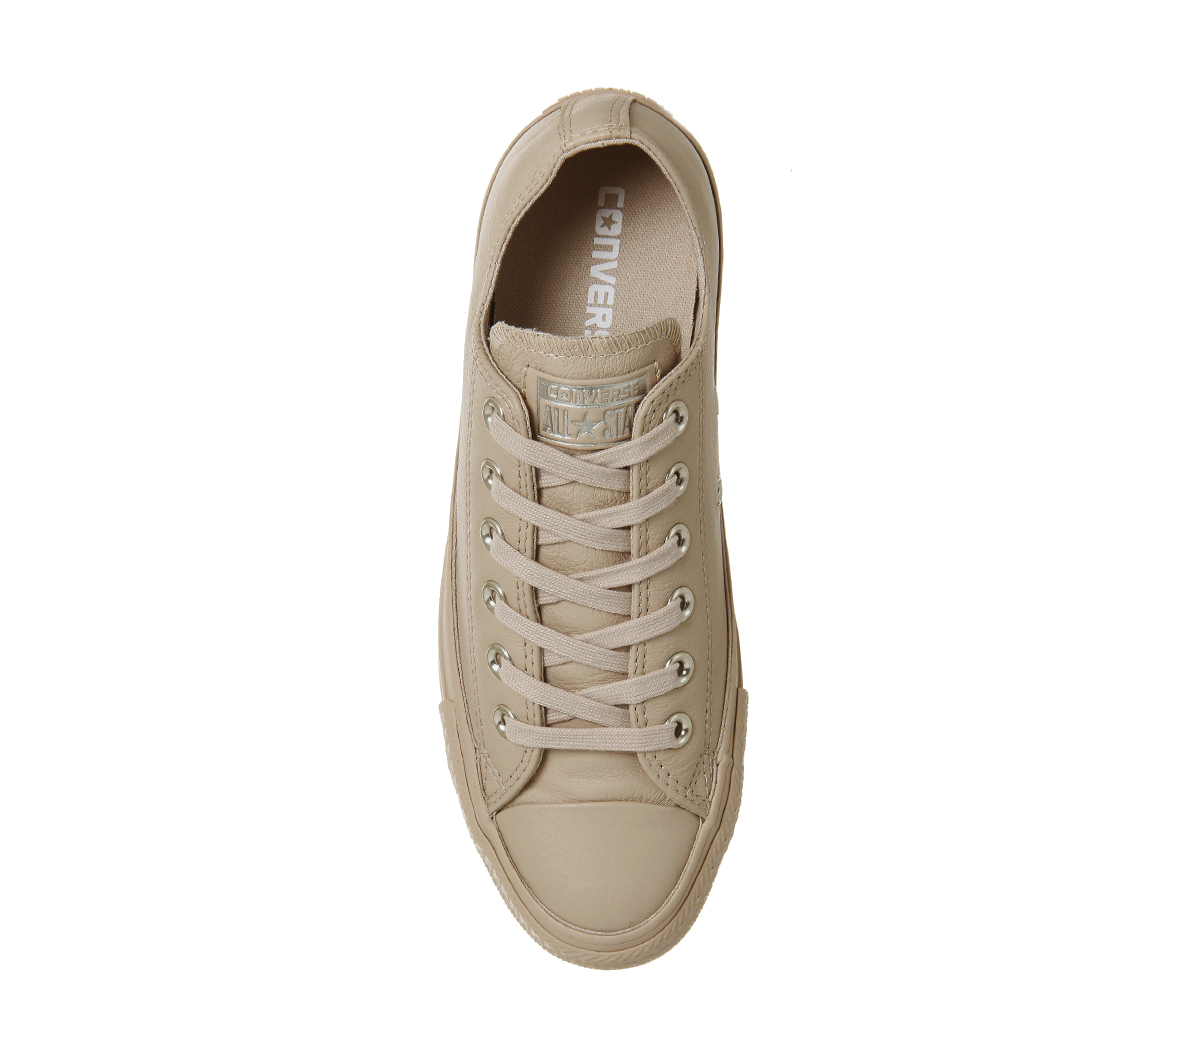 converse all star low leather sand dollar light gold exclusive